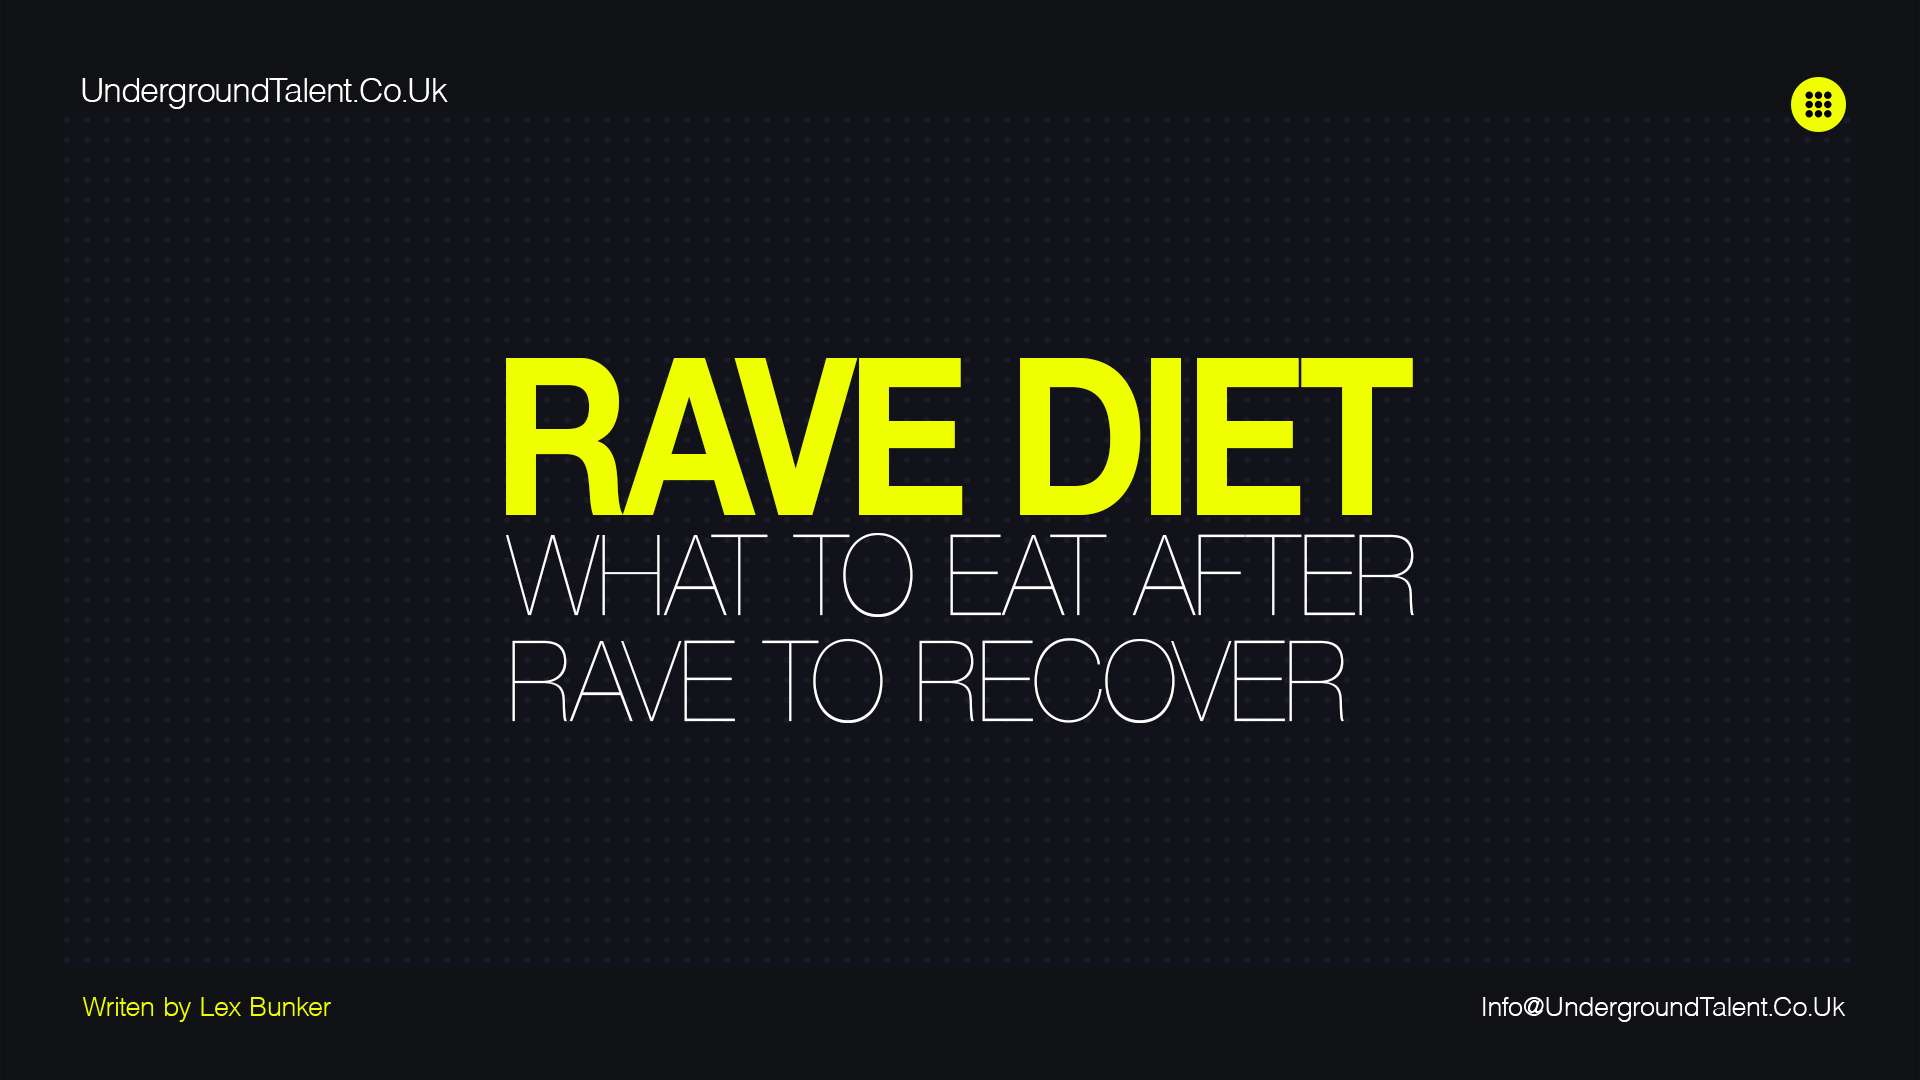 The Rave Diet: What to Eat After Rave to Recover?